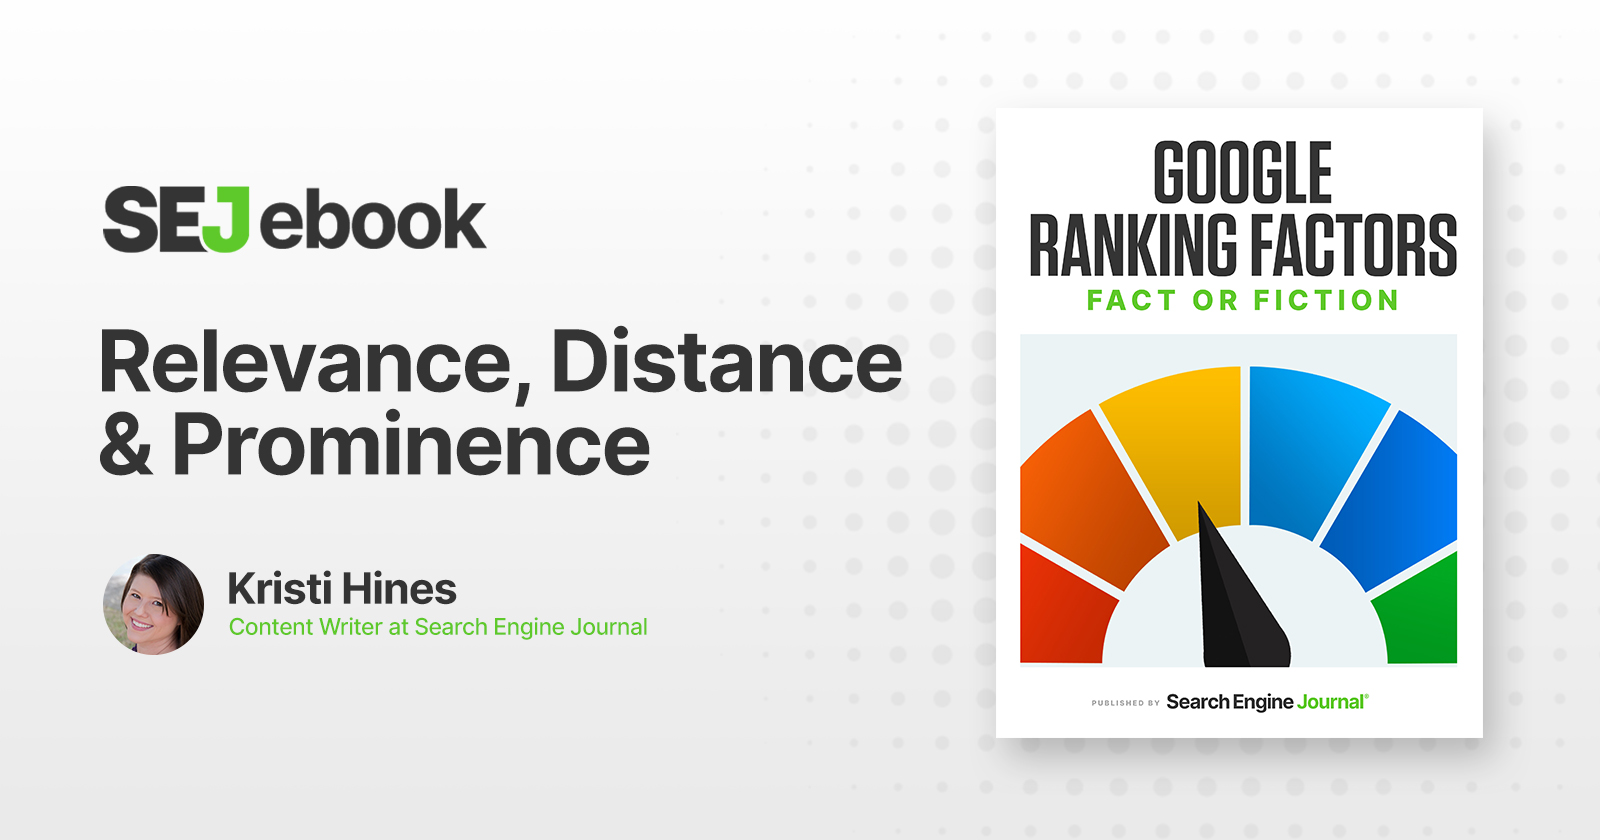 Are 301 Redirects A Google Ranking Factor?